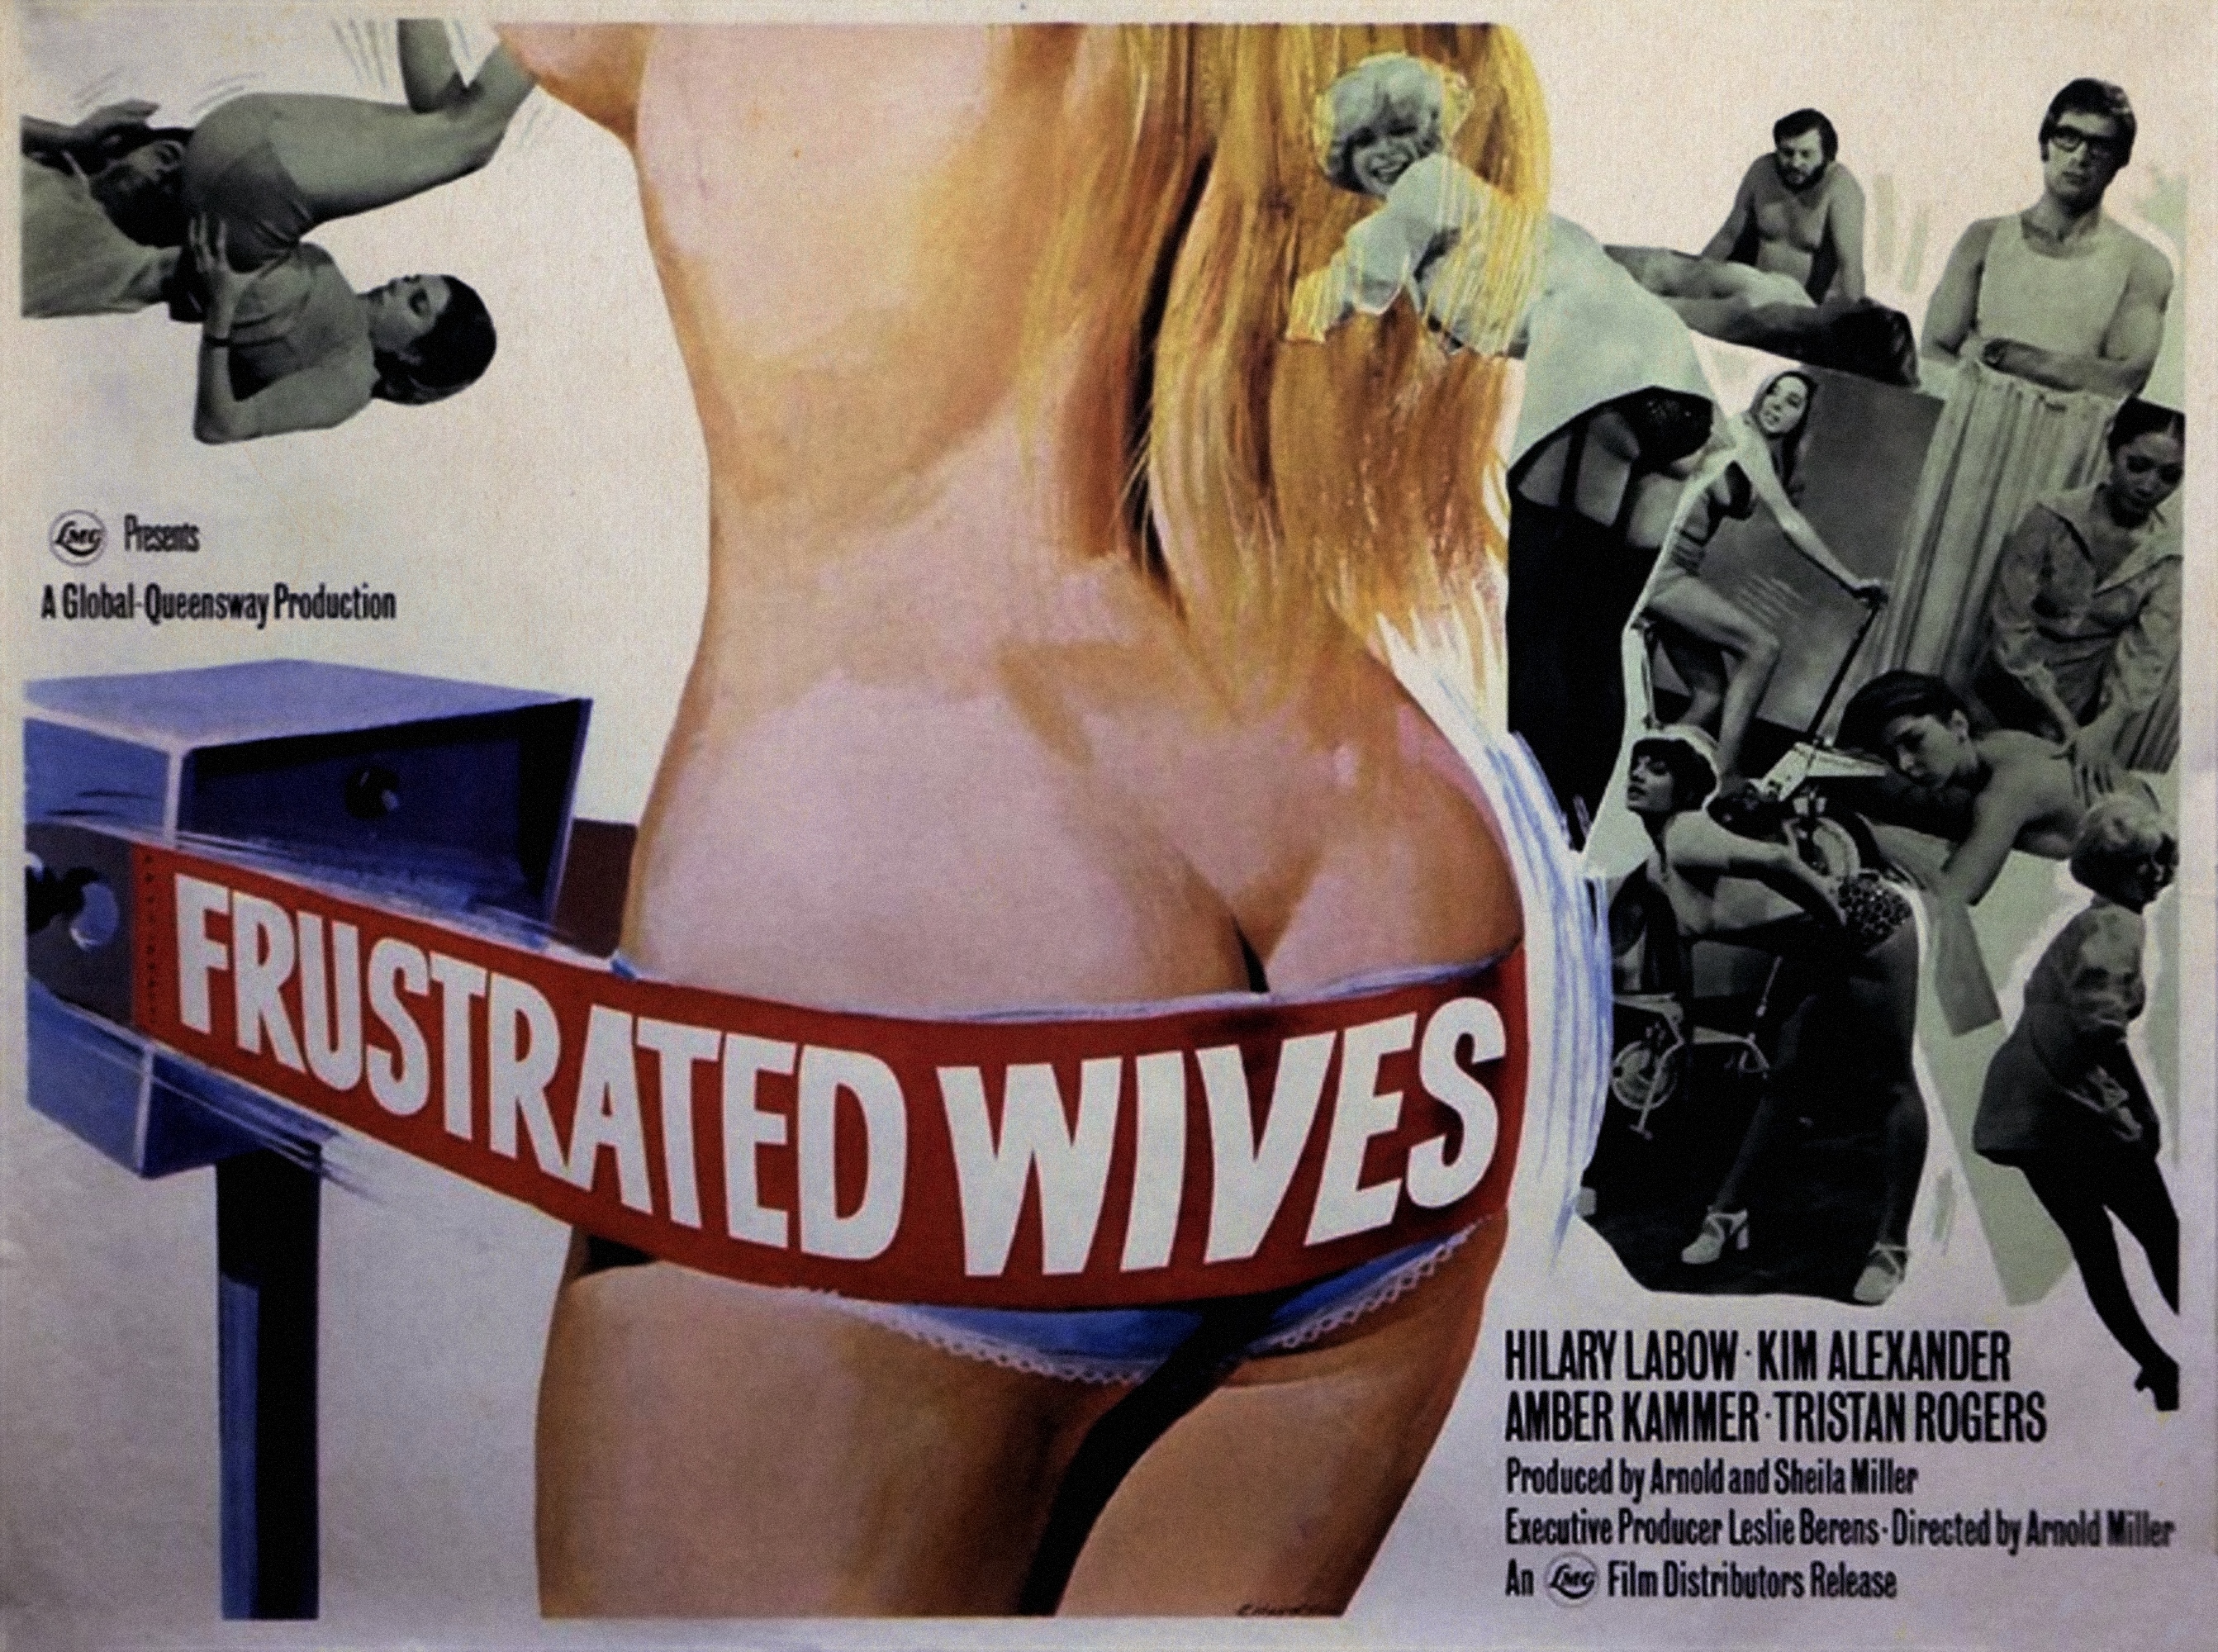 Frustrated Wives (1974) Screenshot 1